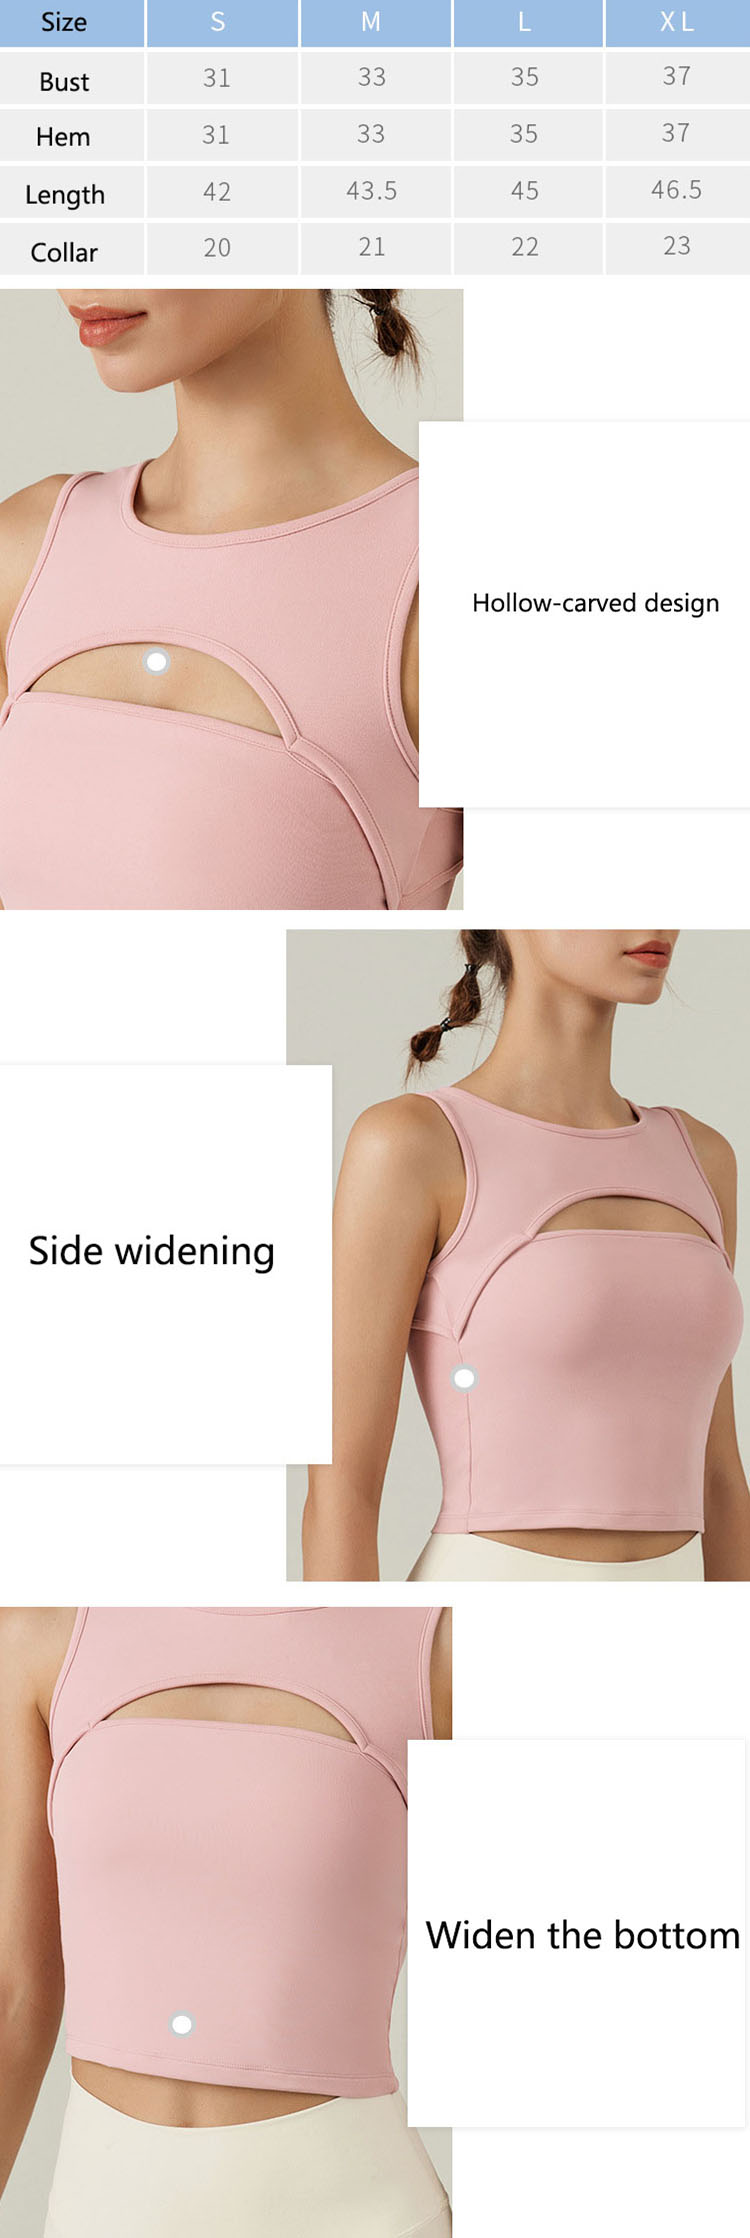 The widened bottom is designed to wrap the waist and abdomen and create a beautiful waist curve